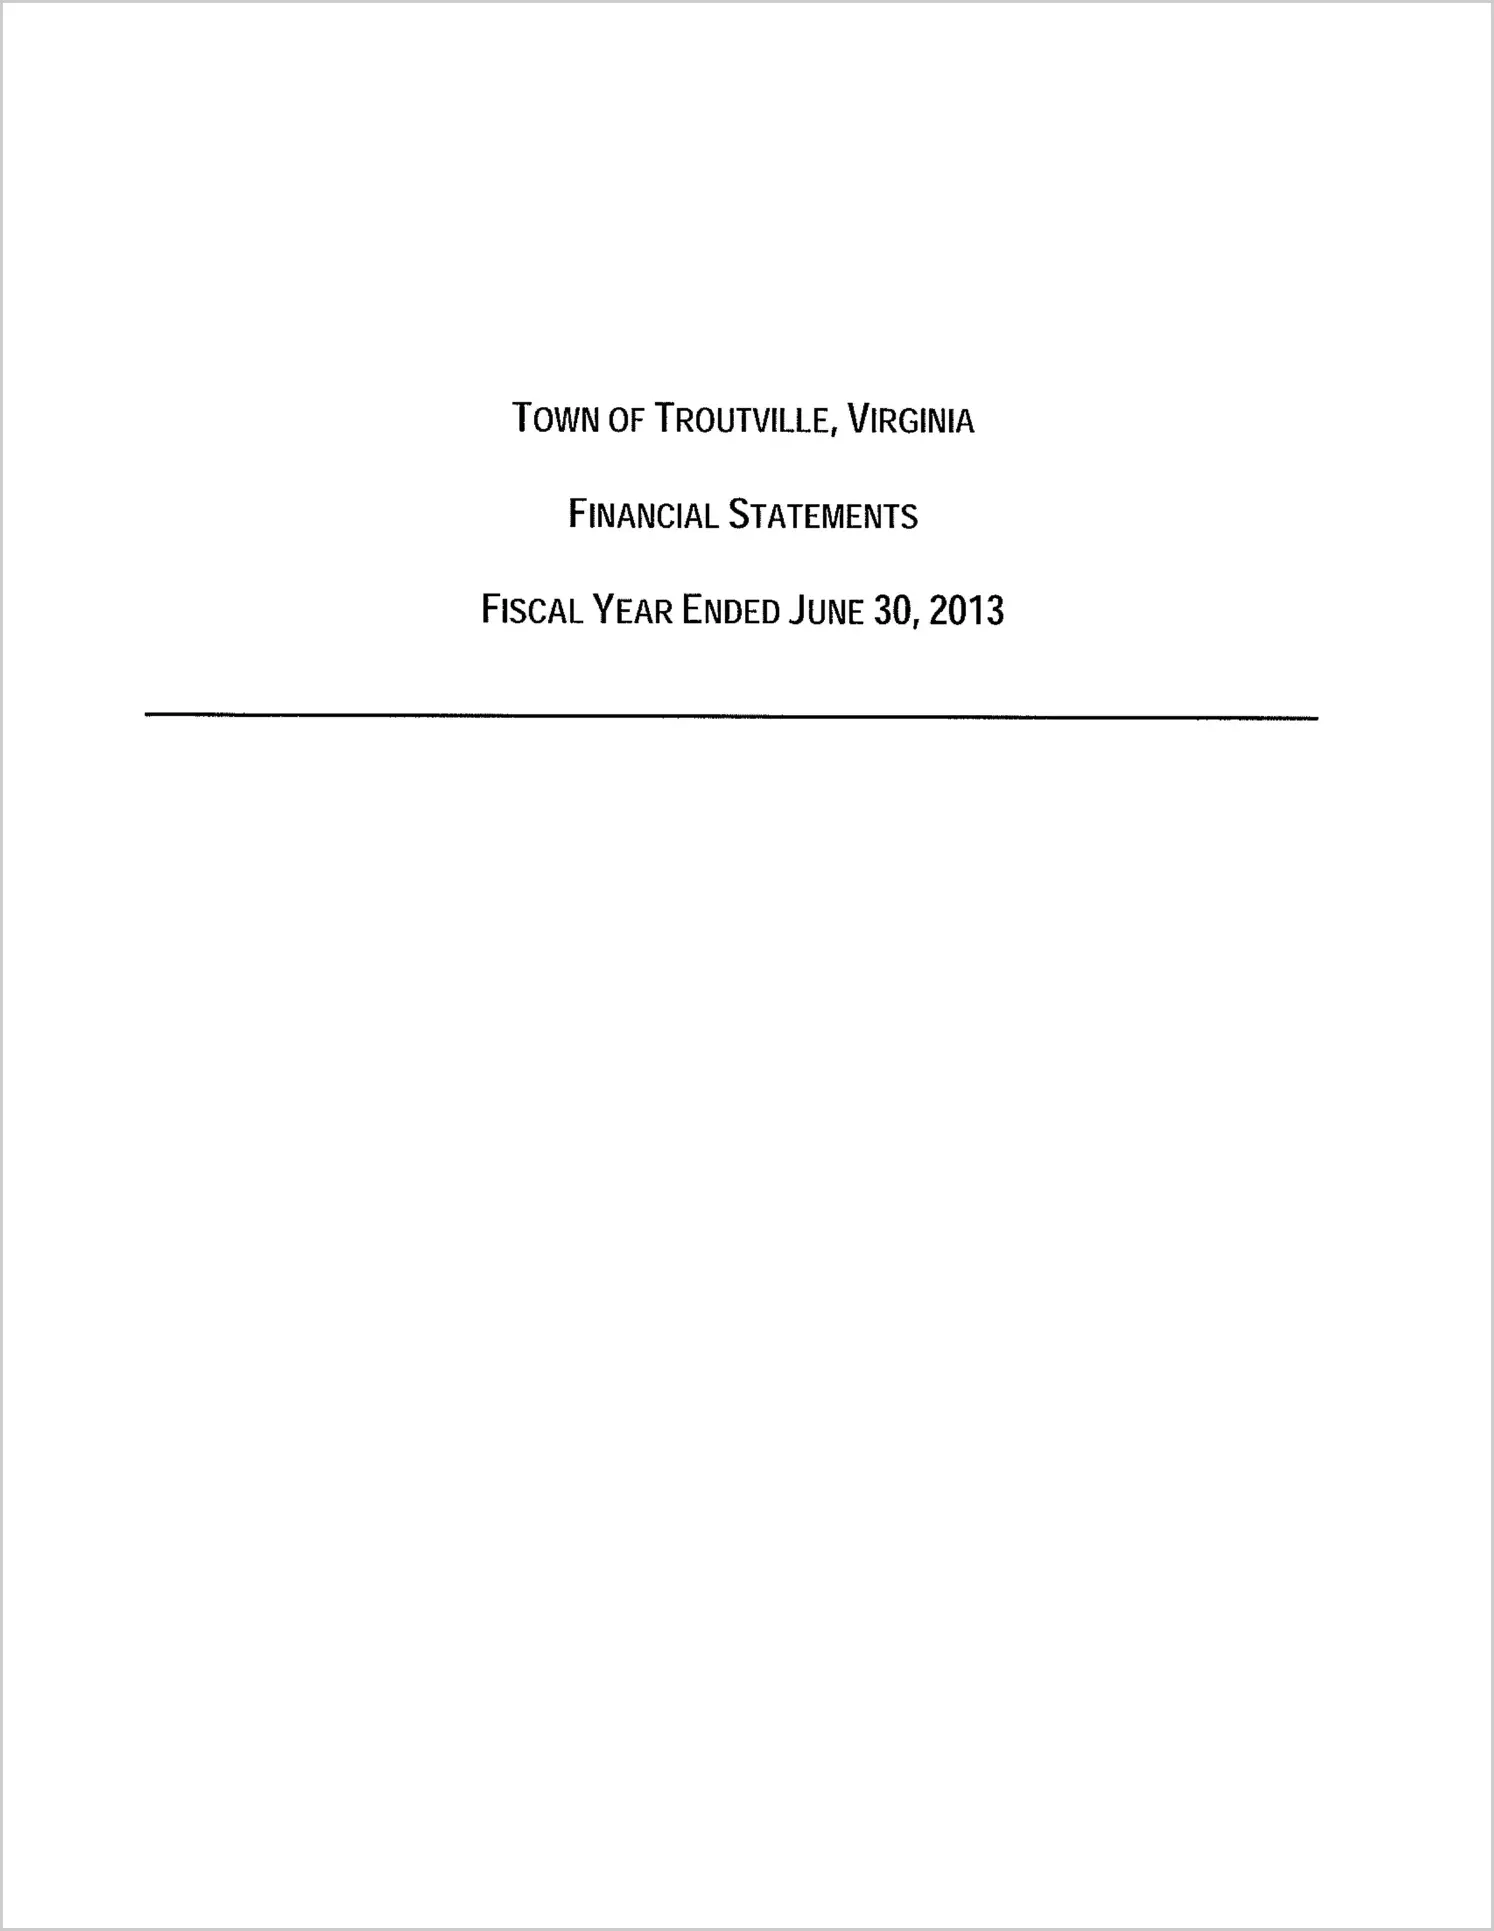 2013 Annual Financial Report for Town of Troutville